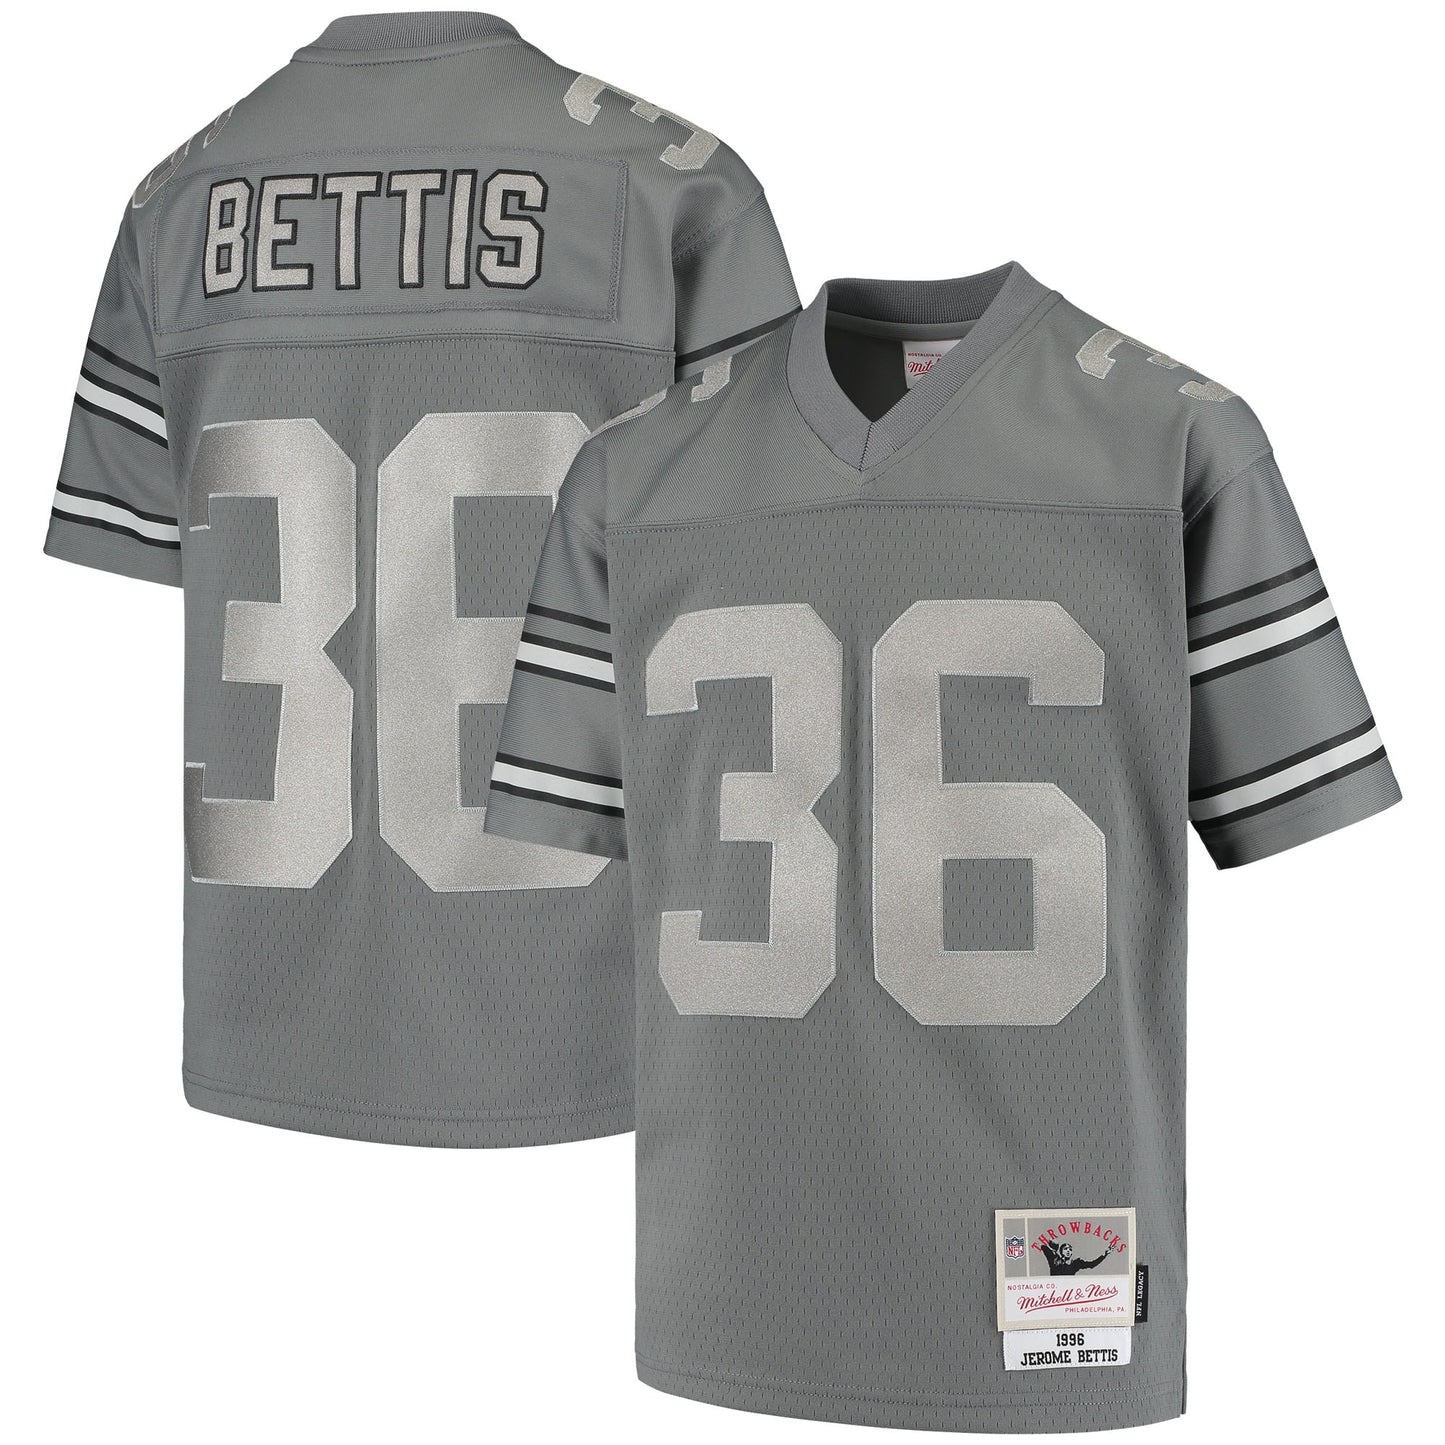 Jerome Bettis Pittsburgh Steelers Mitchell & Ness Youth 1996 Retired Player Metal Replica Jersey - Charcoal